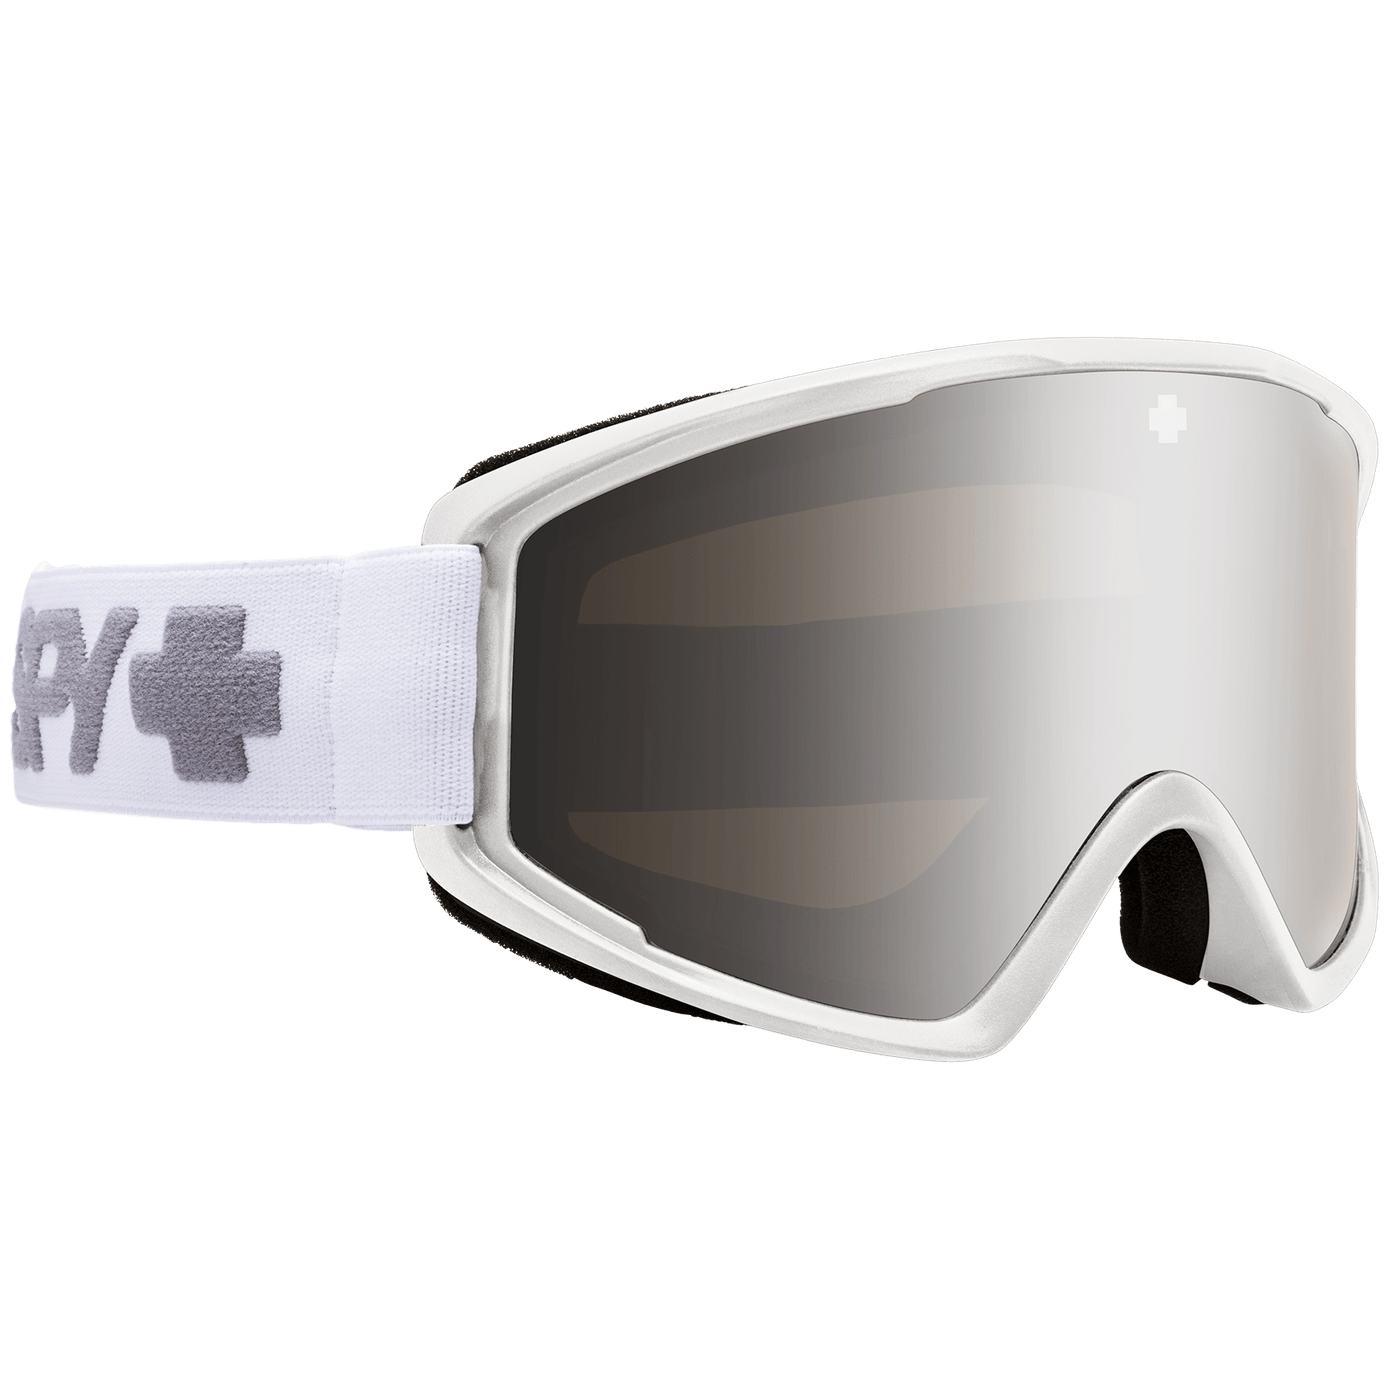 SPY Crusher Elite Snow Goggles - Matte White 8Lines Shop - Fast Shipping